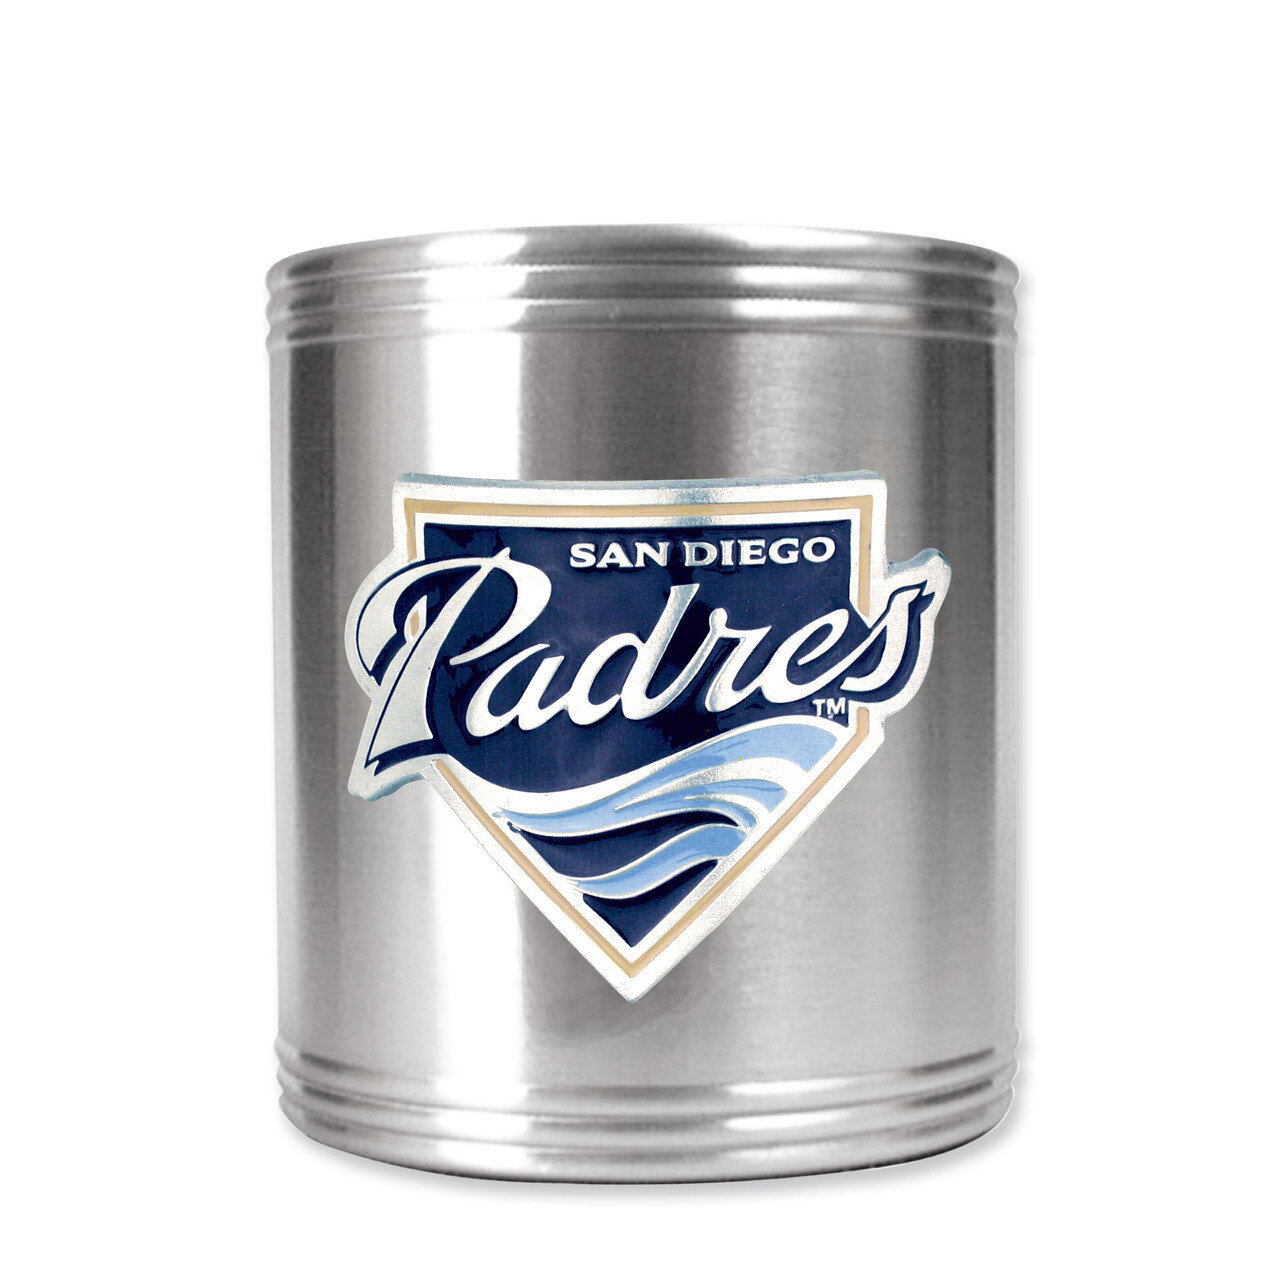 San Diego Padres Insulated Stainless Steel Holder GC832